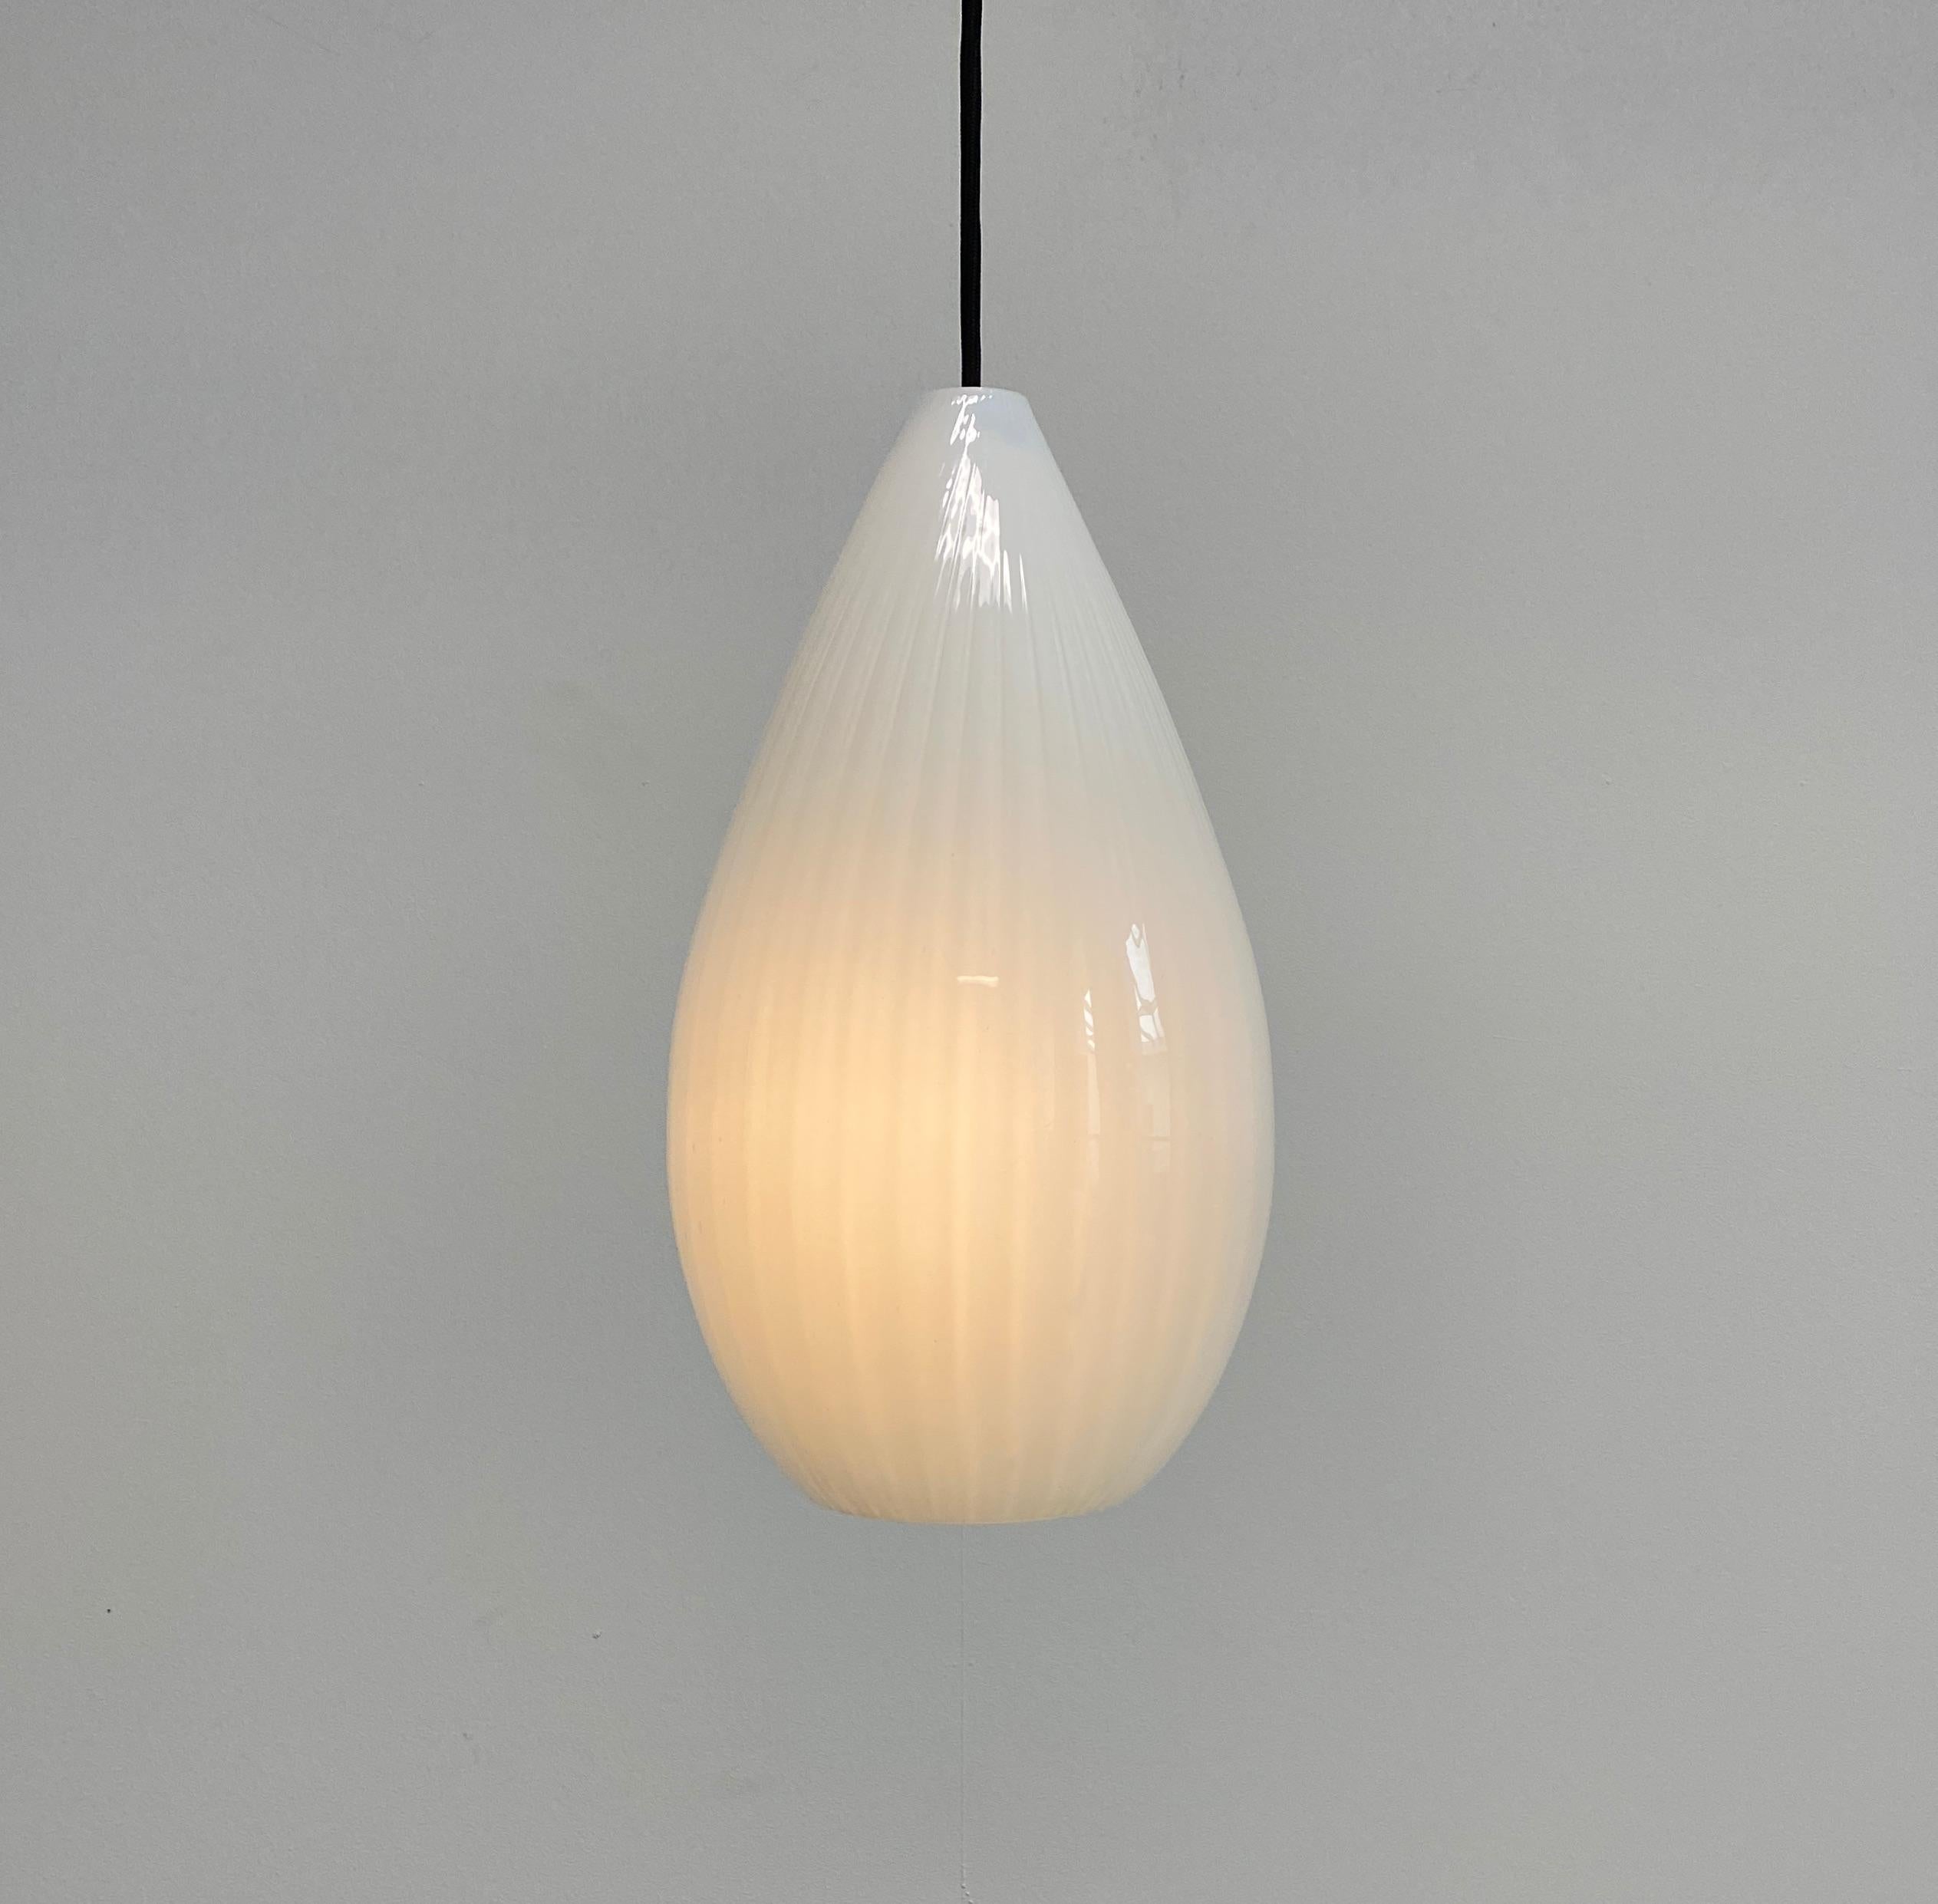 Large glass tear-drop pendant light, Italy, probably circa 1960's

Well-sized glass pendant fixture consisting of a beautiful blown glass shade with white on white stripes which also show quite delicately when the light illuminates. It's in very